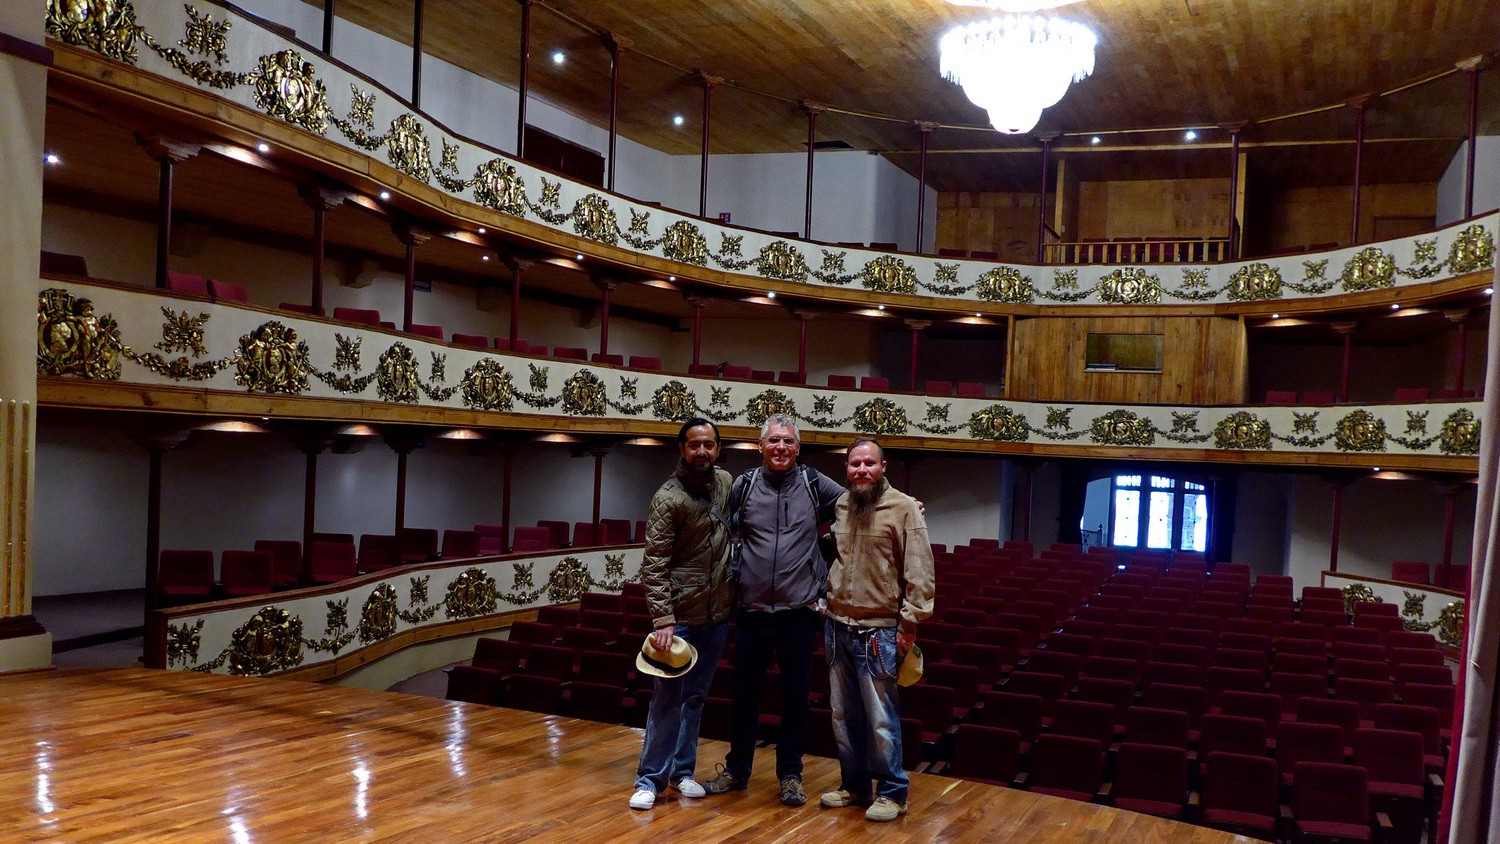 Cuitlahuac, Alfred and Poldi in the theater of Tenango